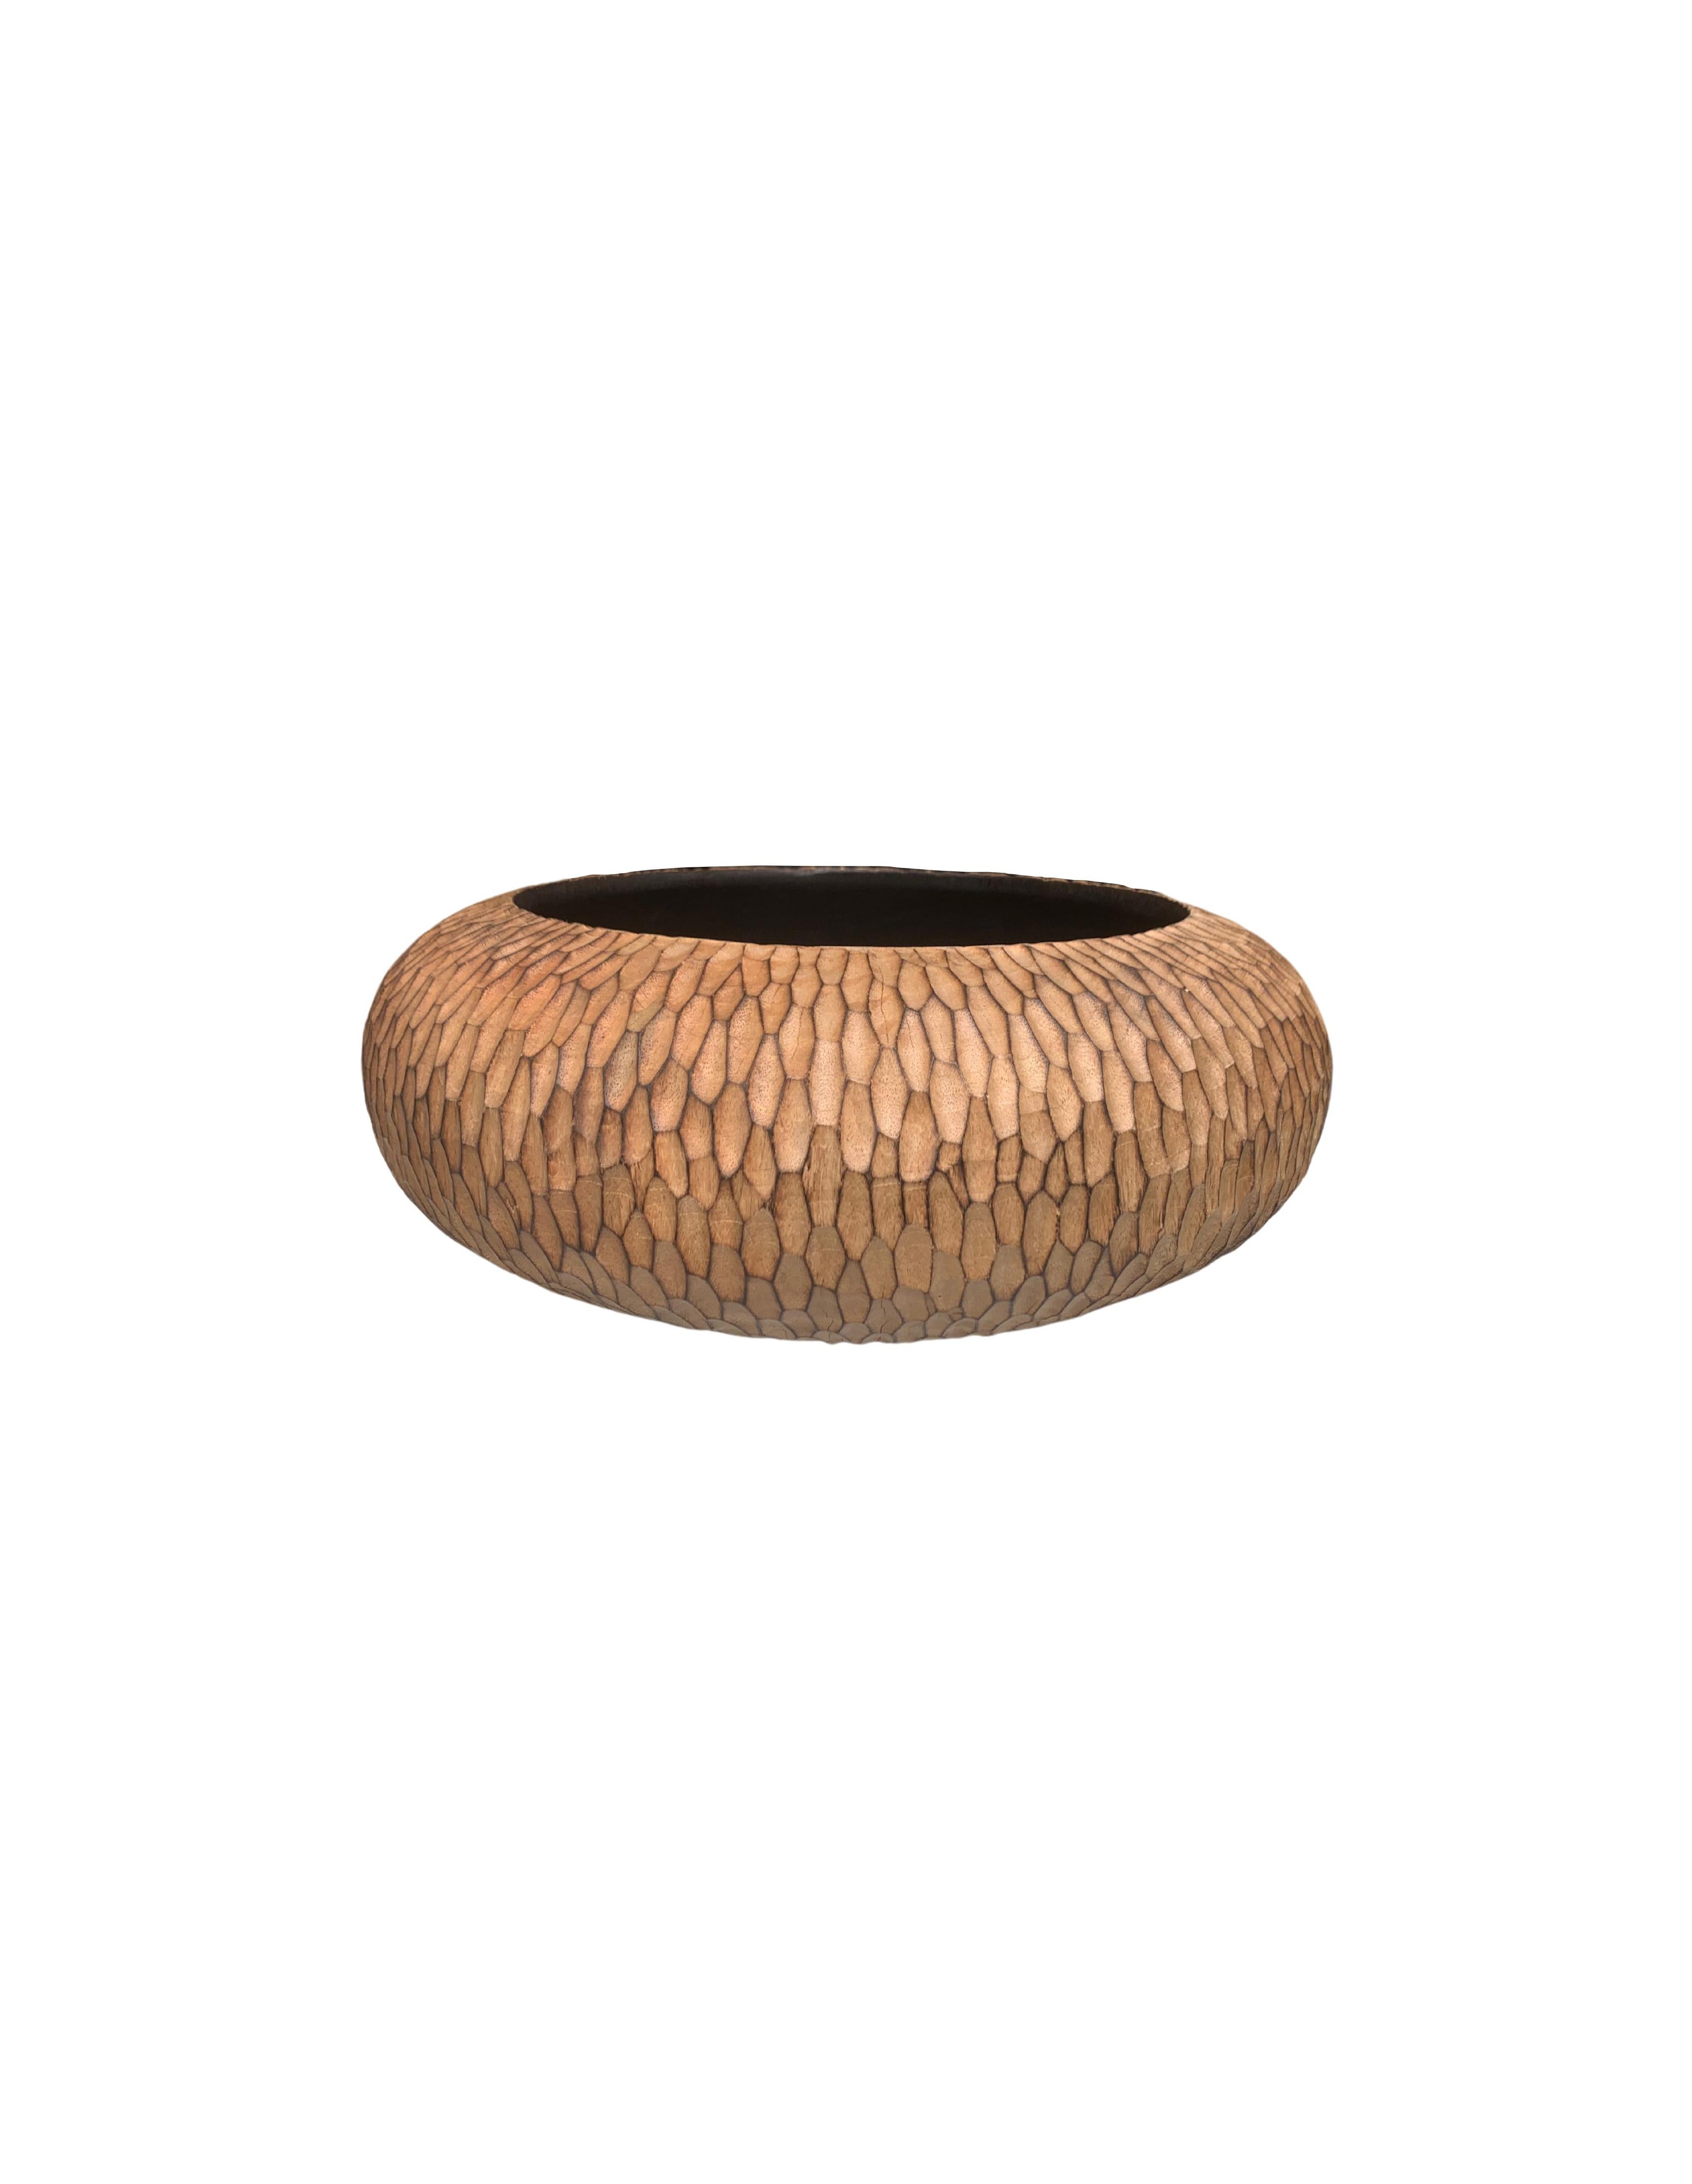 Organic Modern Solid Mango Wood Bowl with Hand-Hewn Detailing and Burnt Detailing For Sale